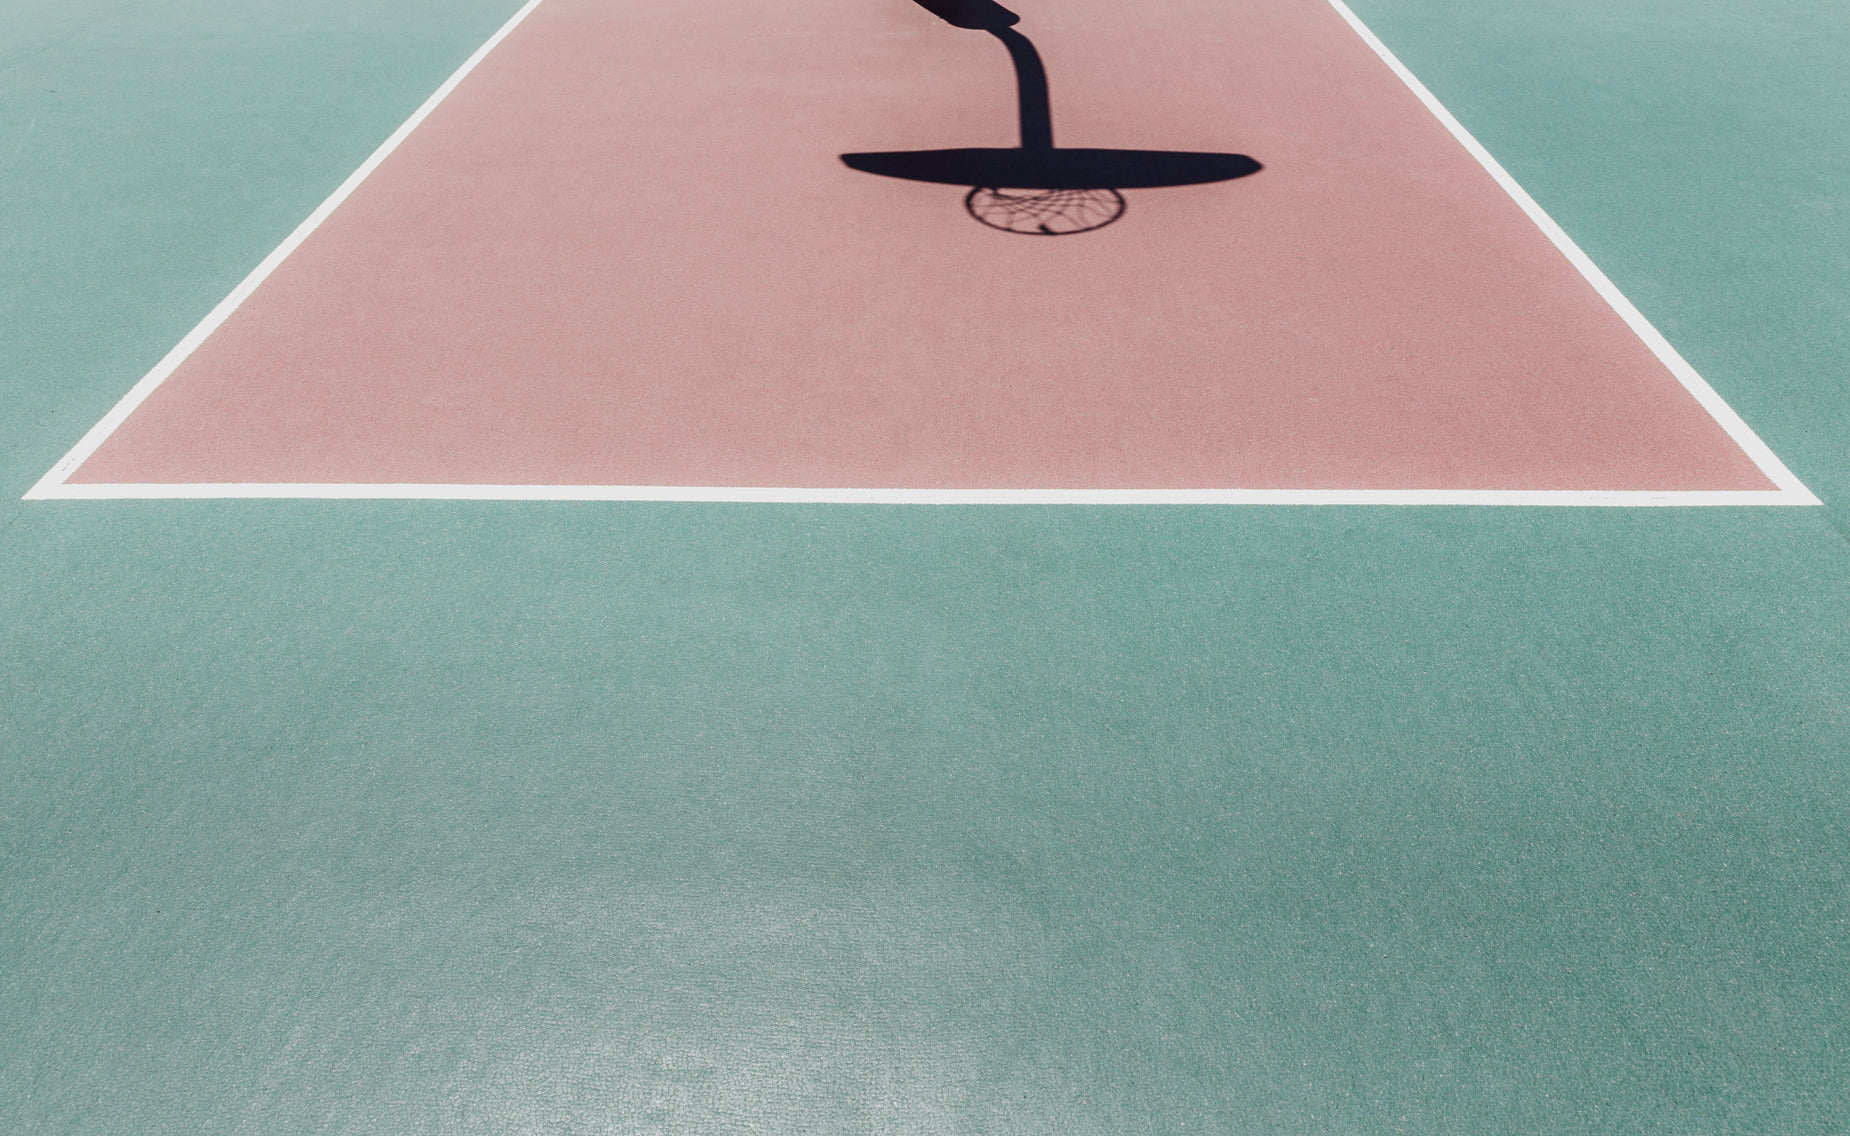 the shadow of a tennis player is displayed on the court